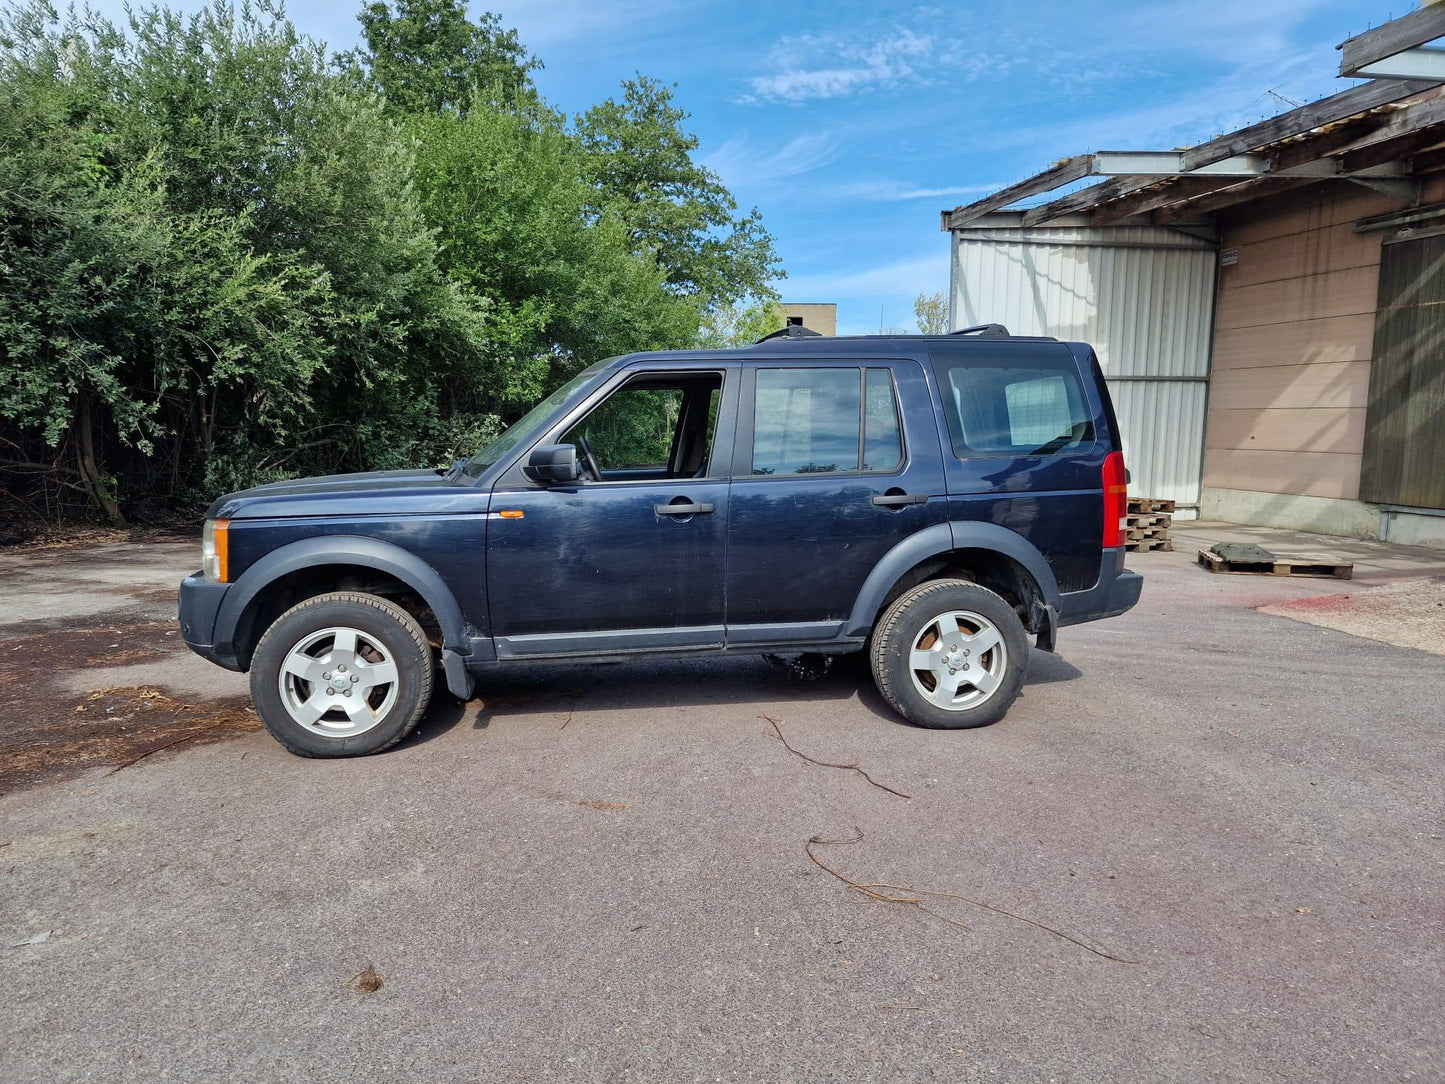 Land Rover Discovery TDV6 SE 2005  - Plaats een bod! - Veilingcoach.be